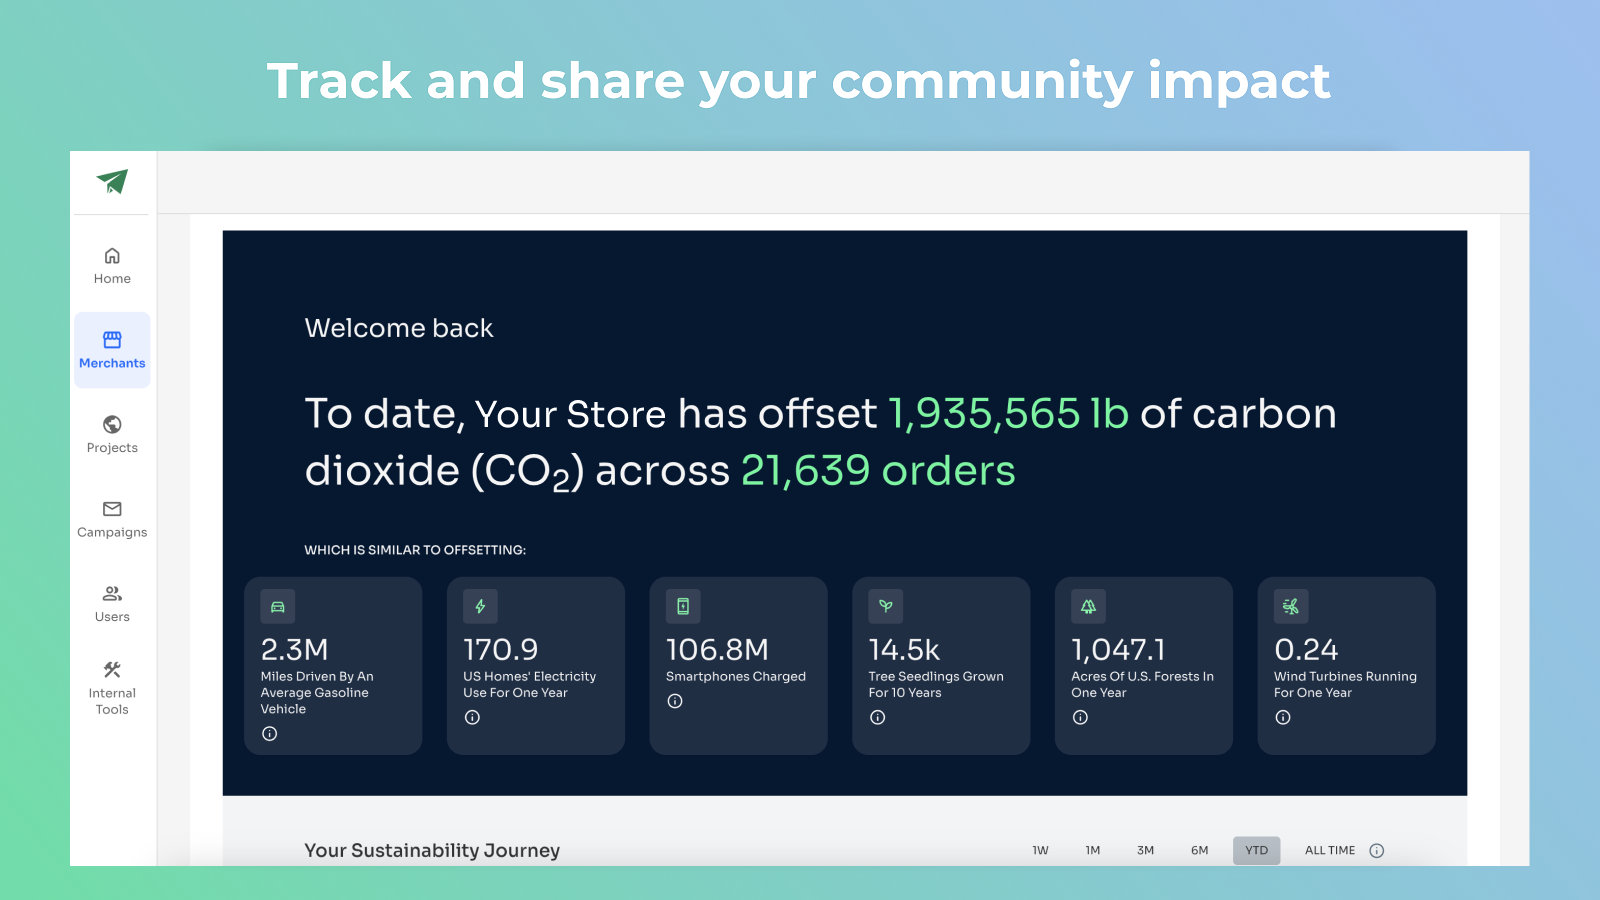 Track and share your community impact with analytics dashboard